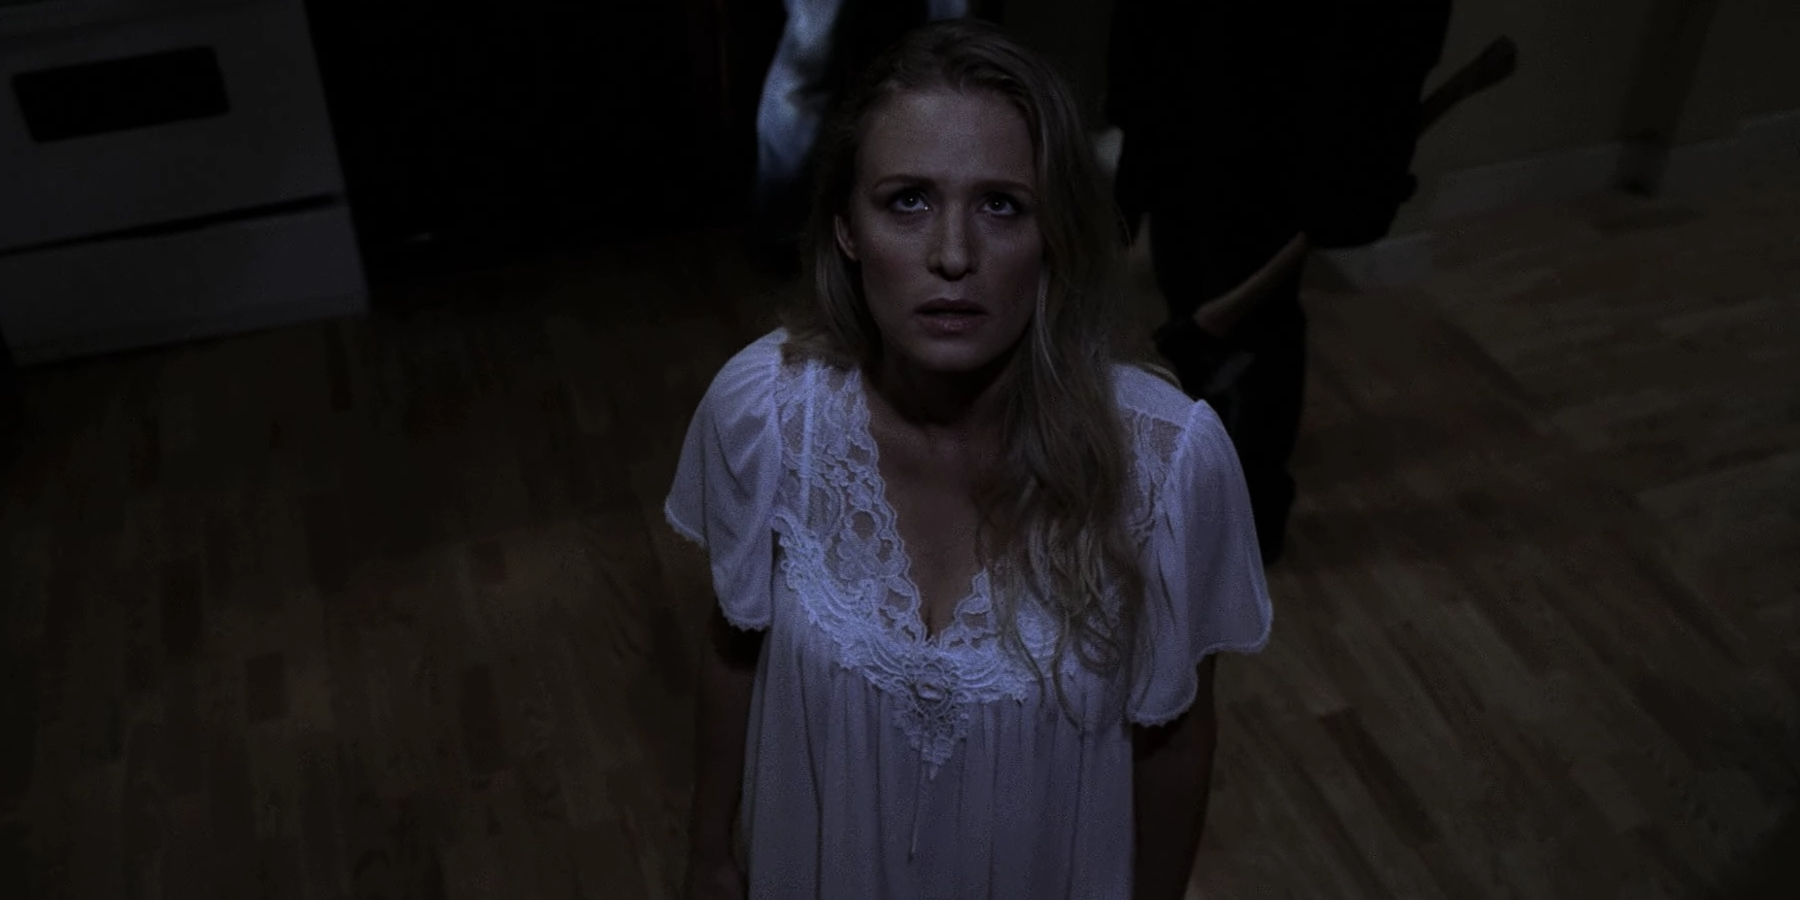 Mary Winchester looks up in fear